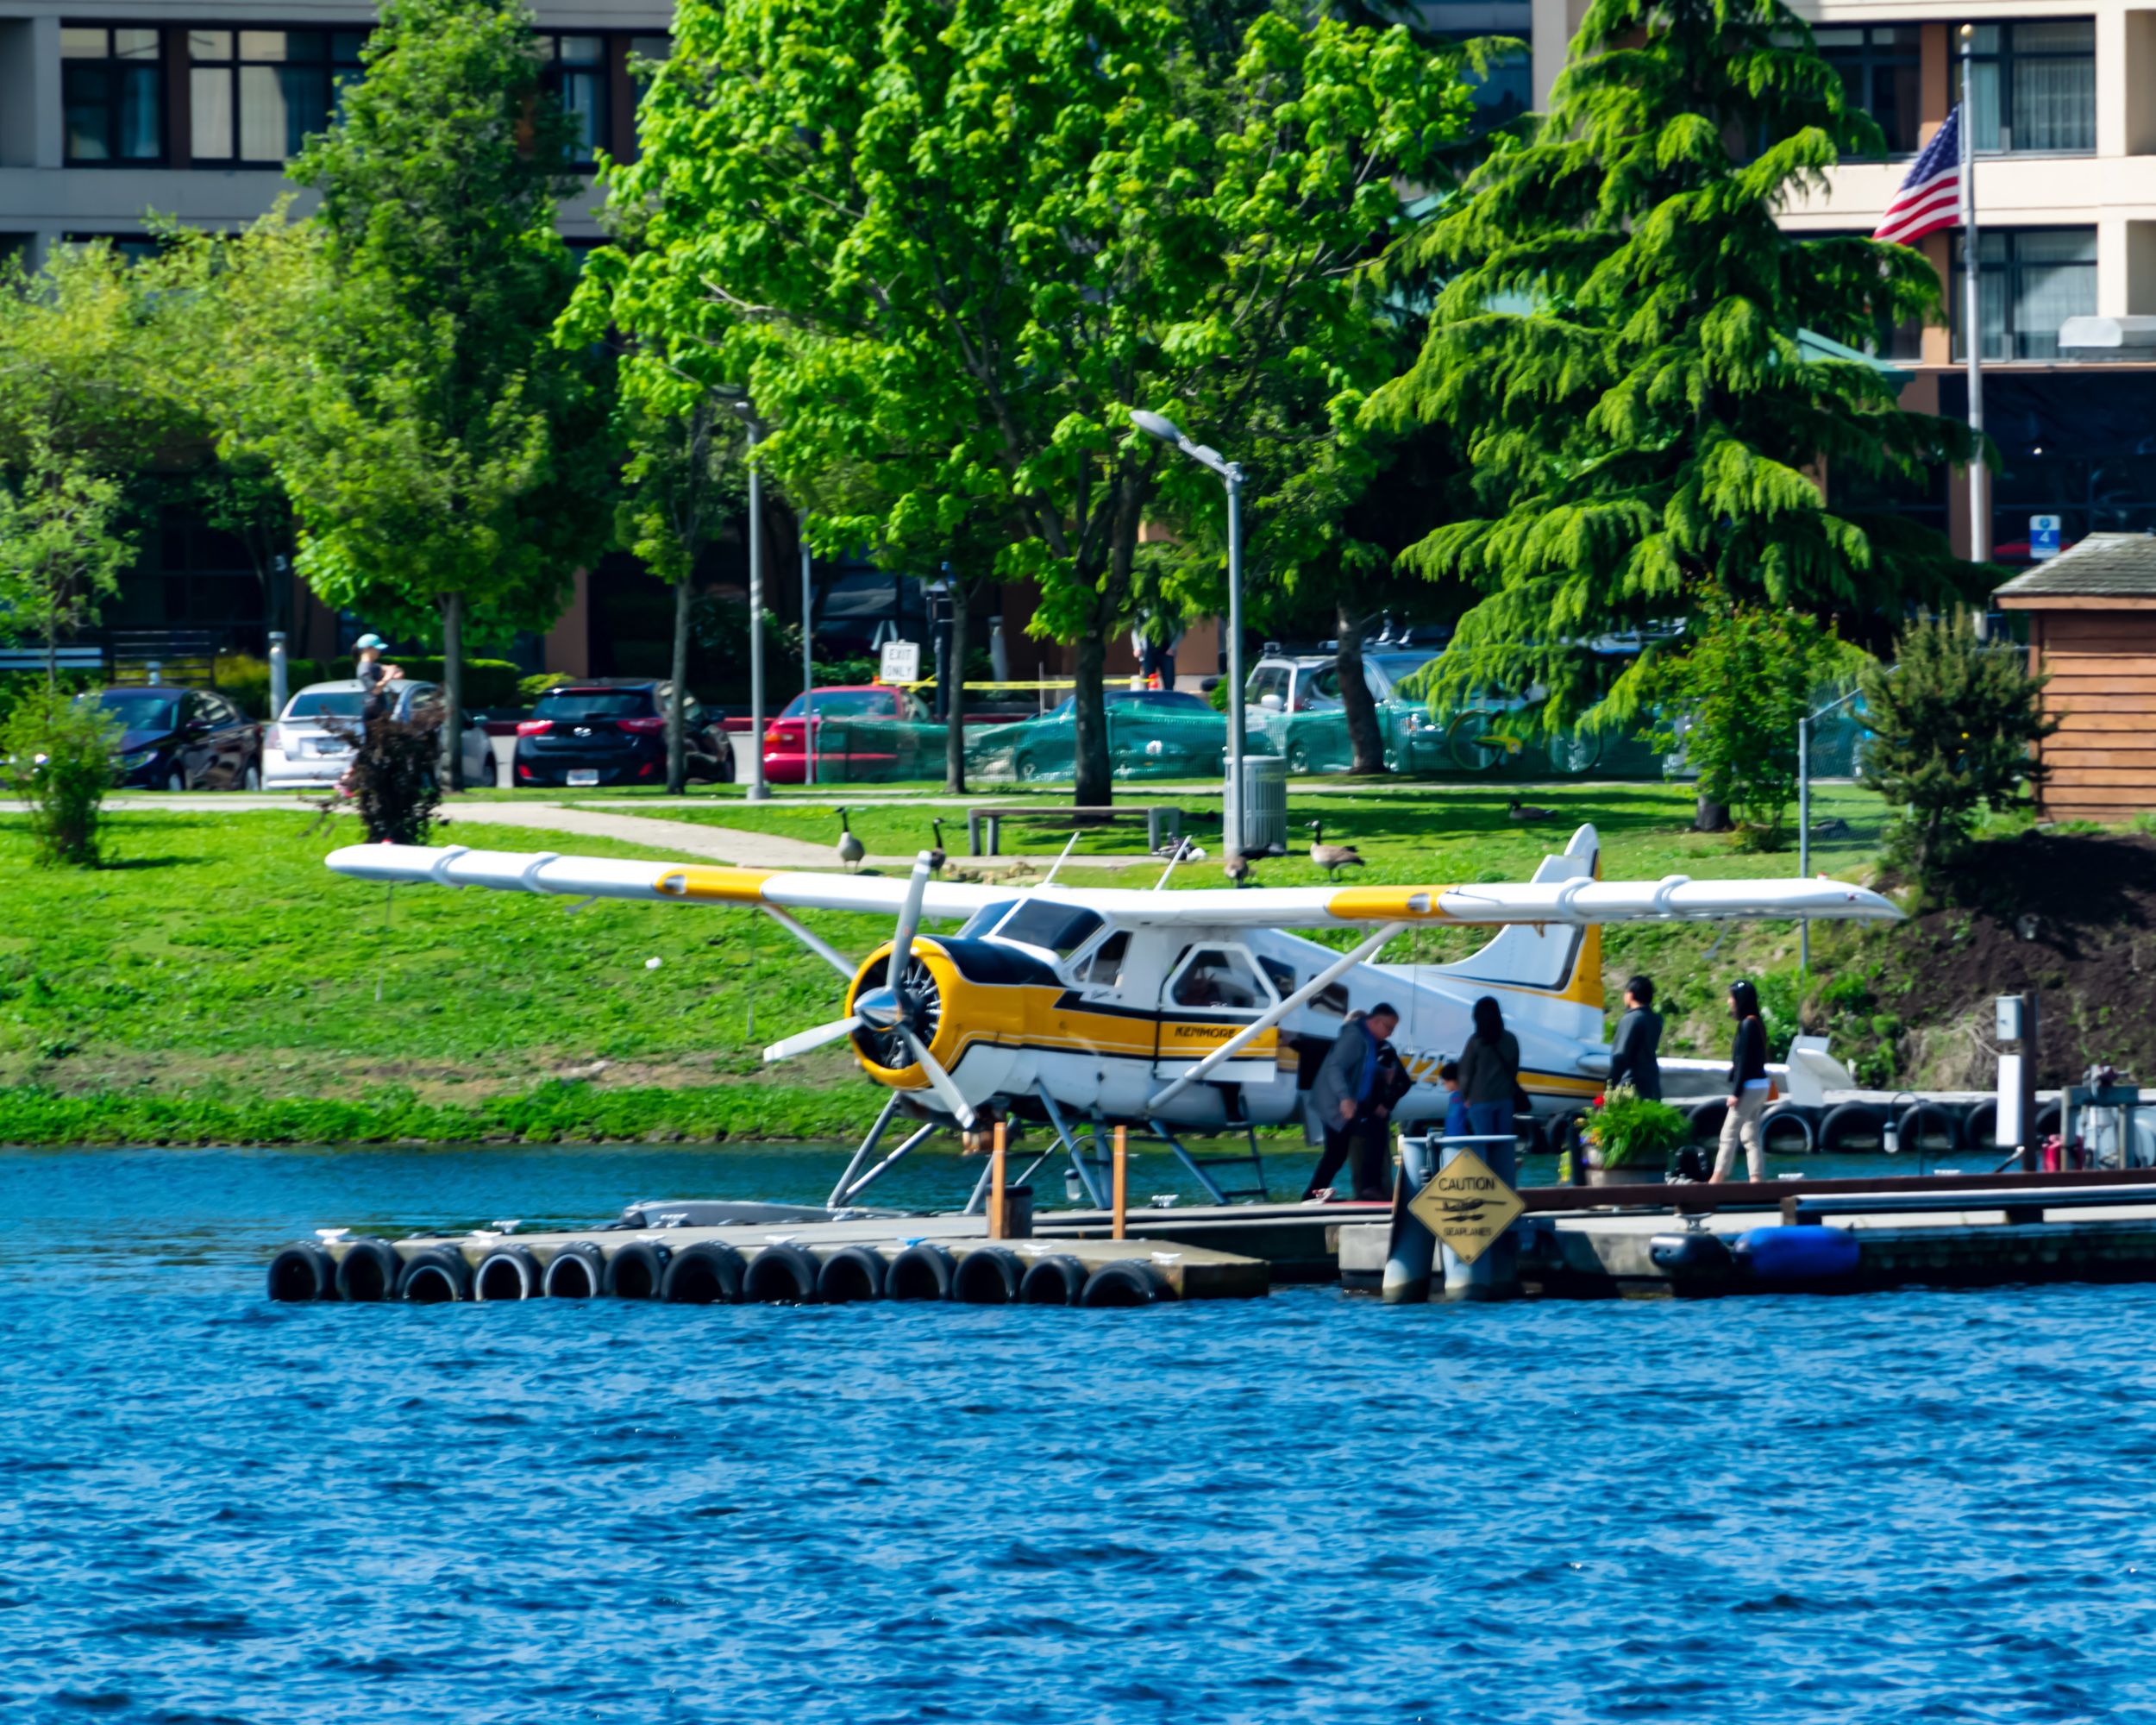 Passengers Boarding A Kenmore Air DHC-2 Beaver From A Waterways Cruise on Lake Union